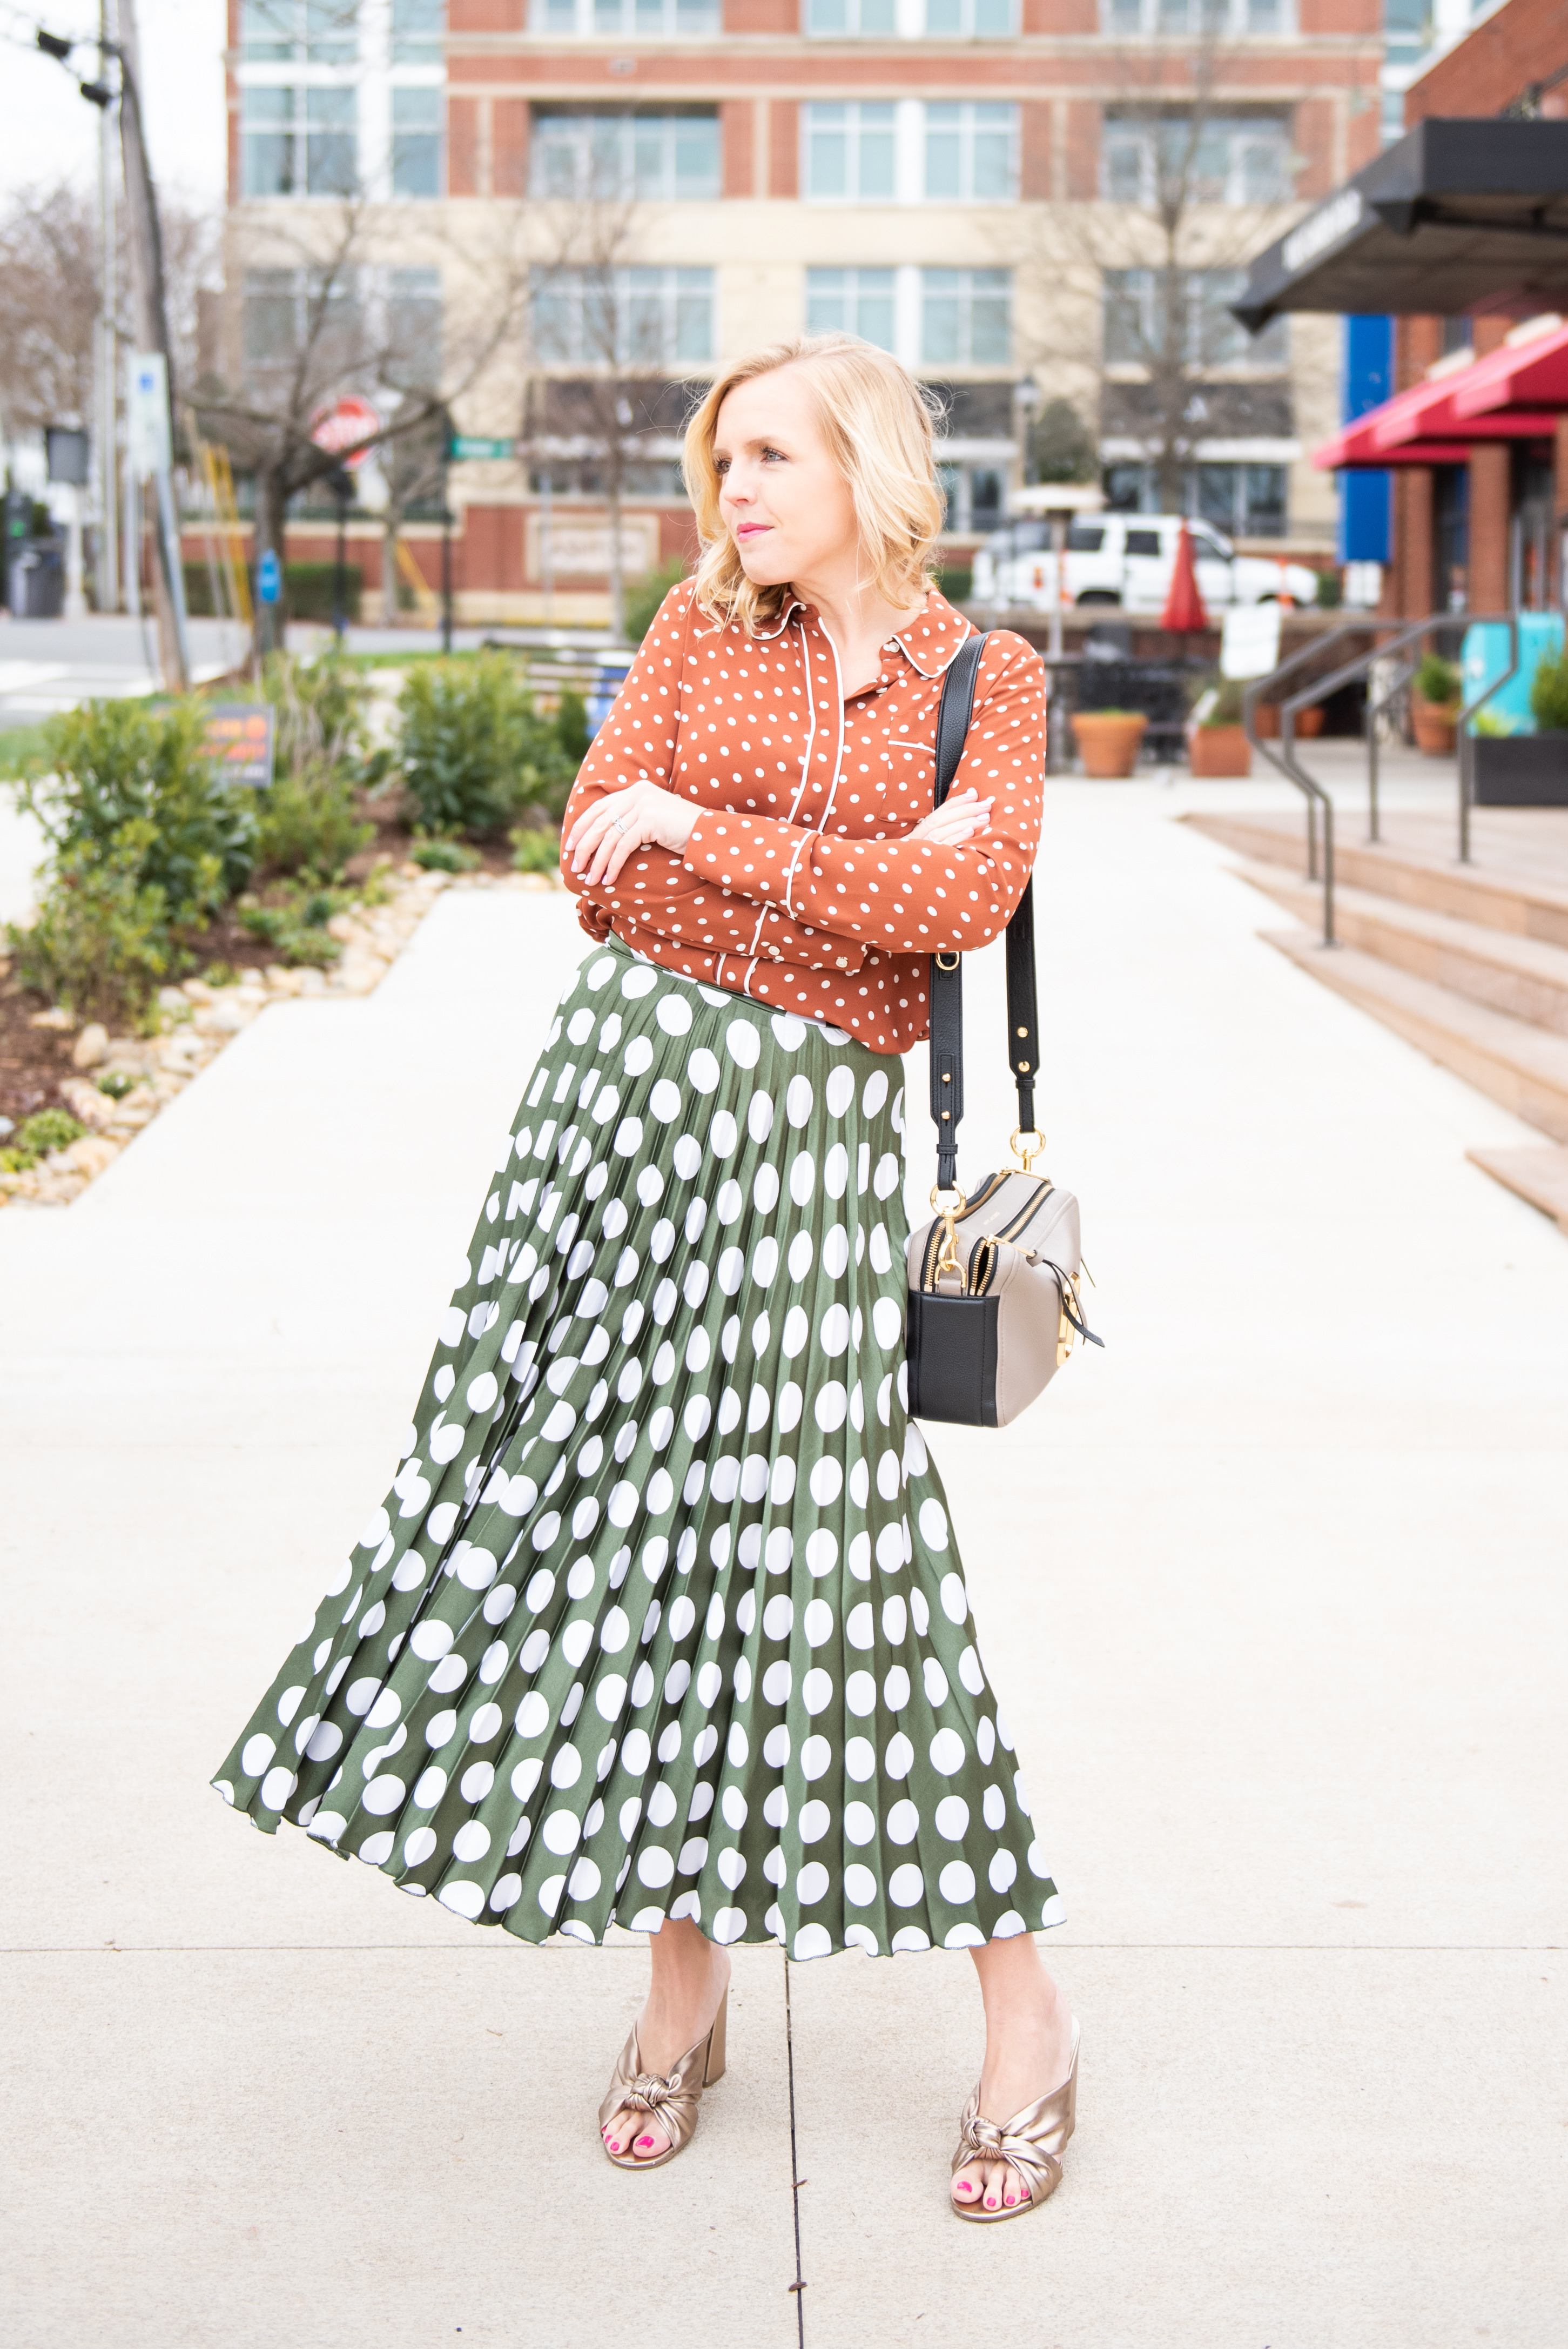 Twosday: Transitioning to Spring in a Polka Dot Skirt